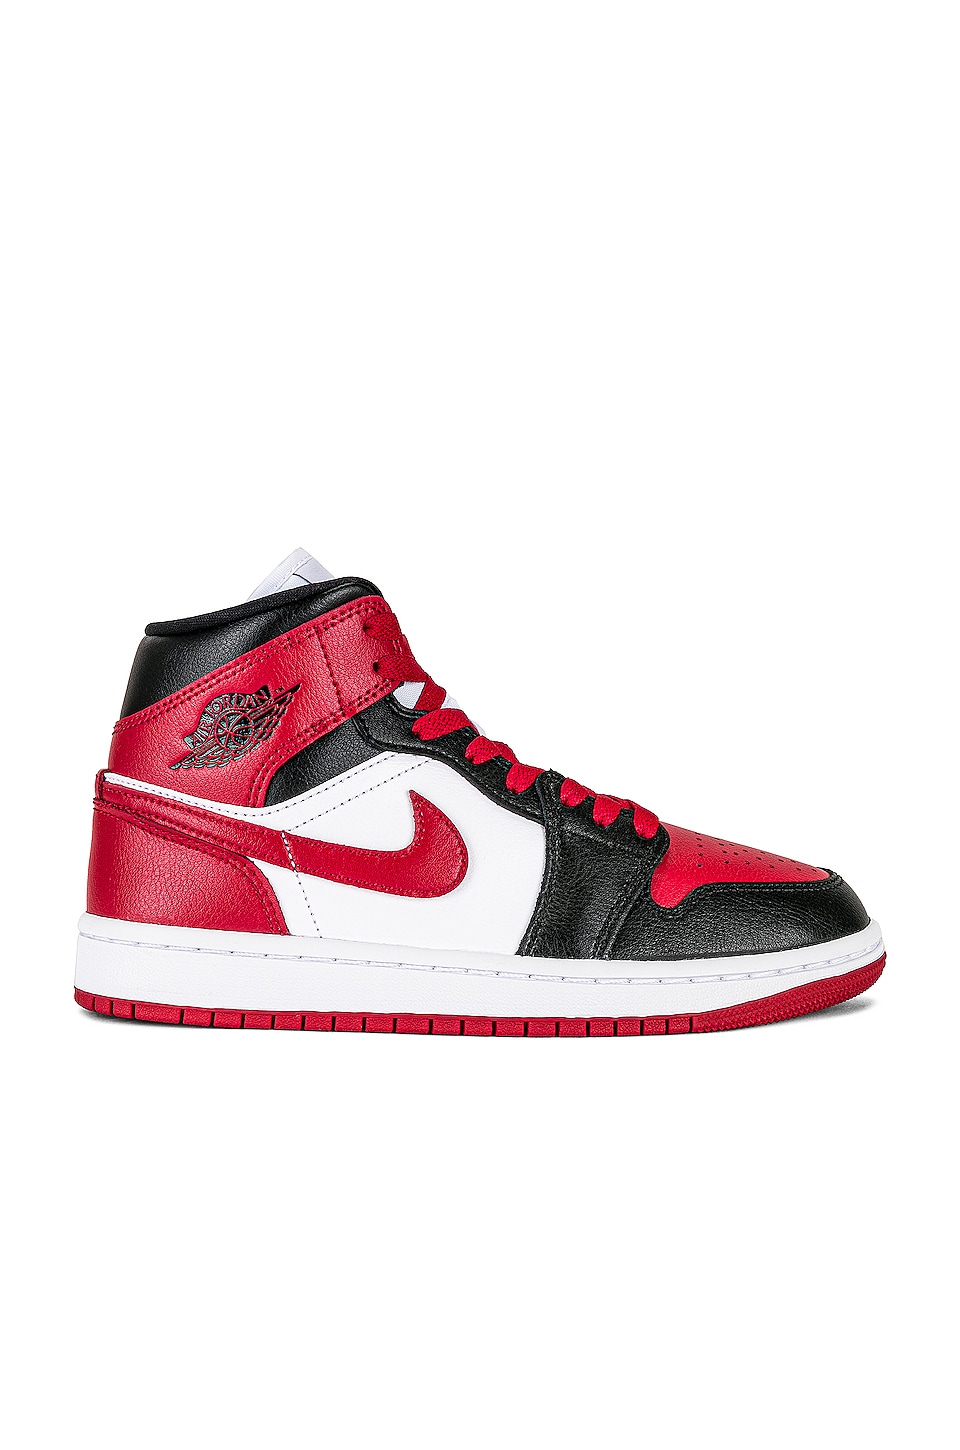 black and red jordans 1 womens